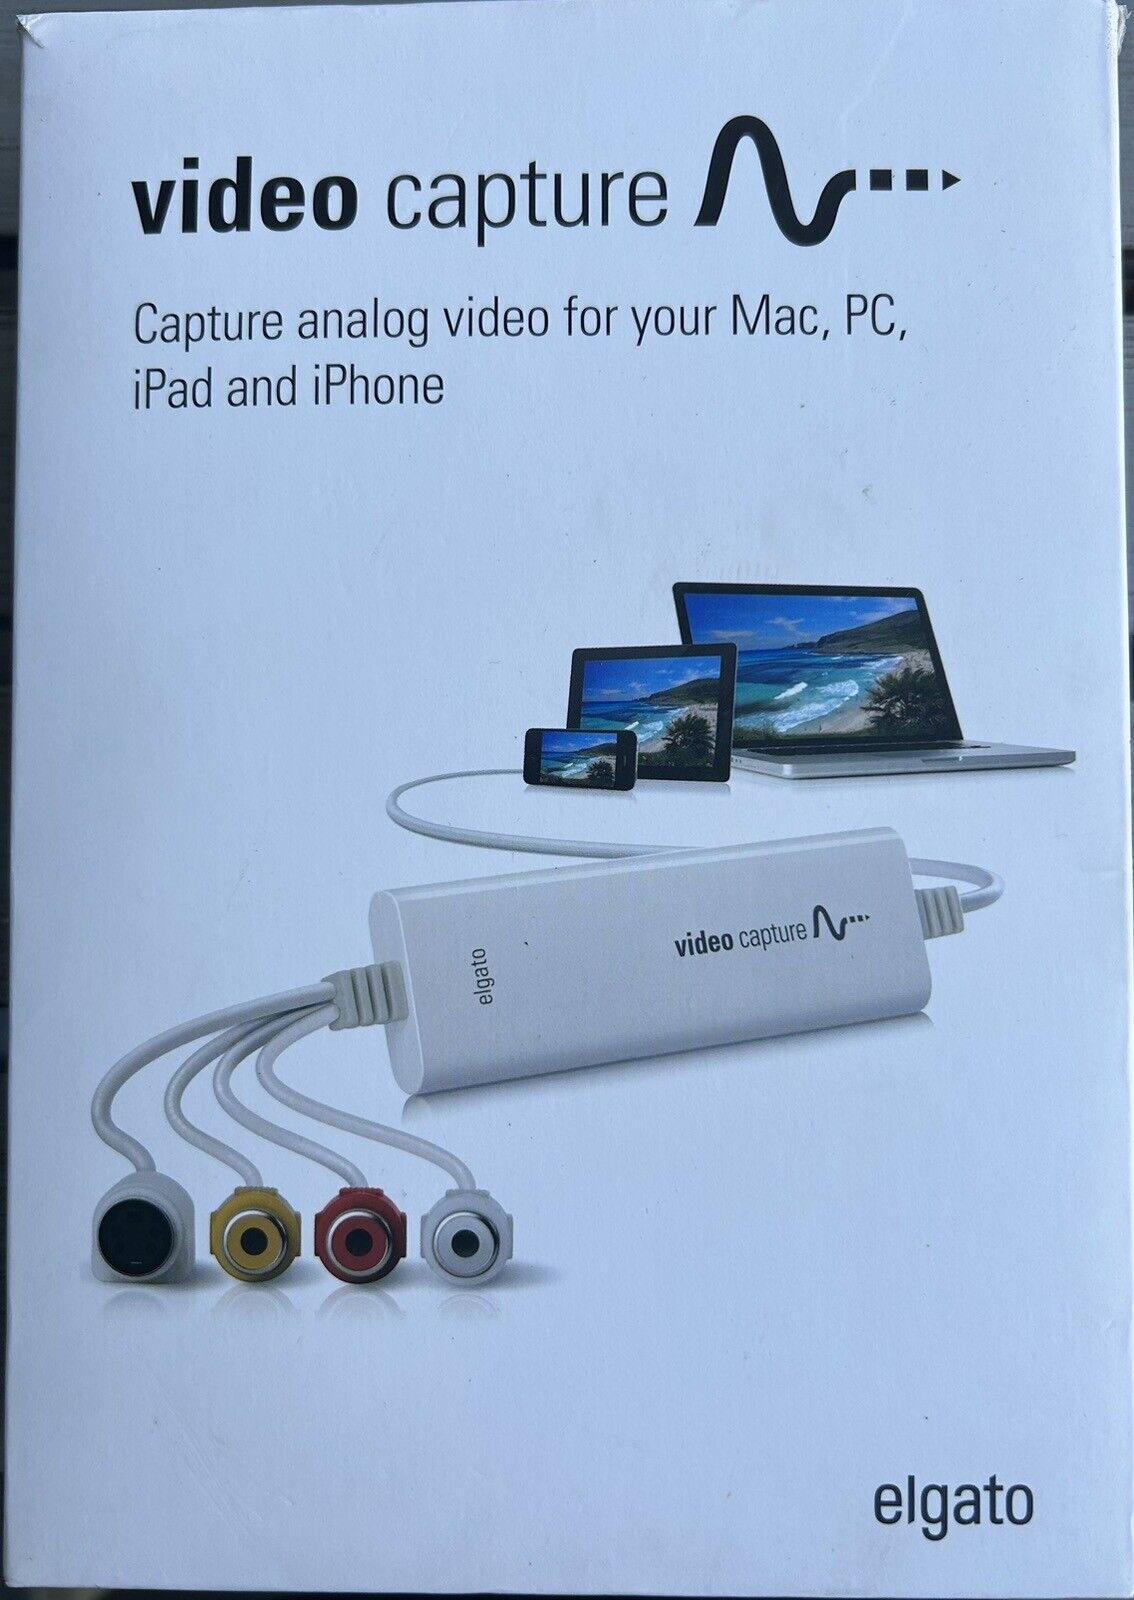 Elgato Video Capture - Capture Analog Video for Mac, PC iPad and iPhone Open Box